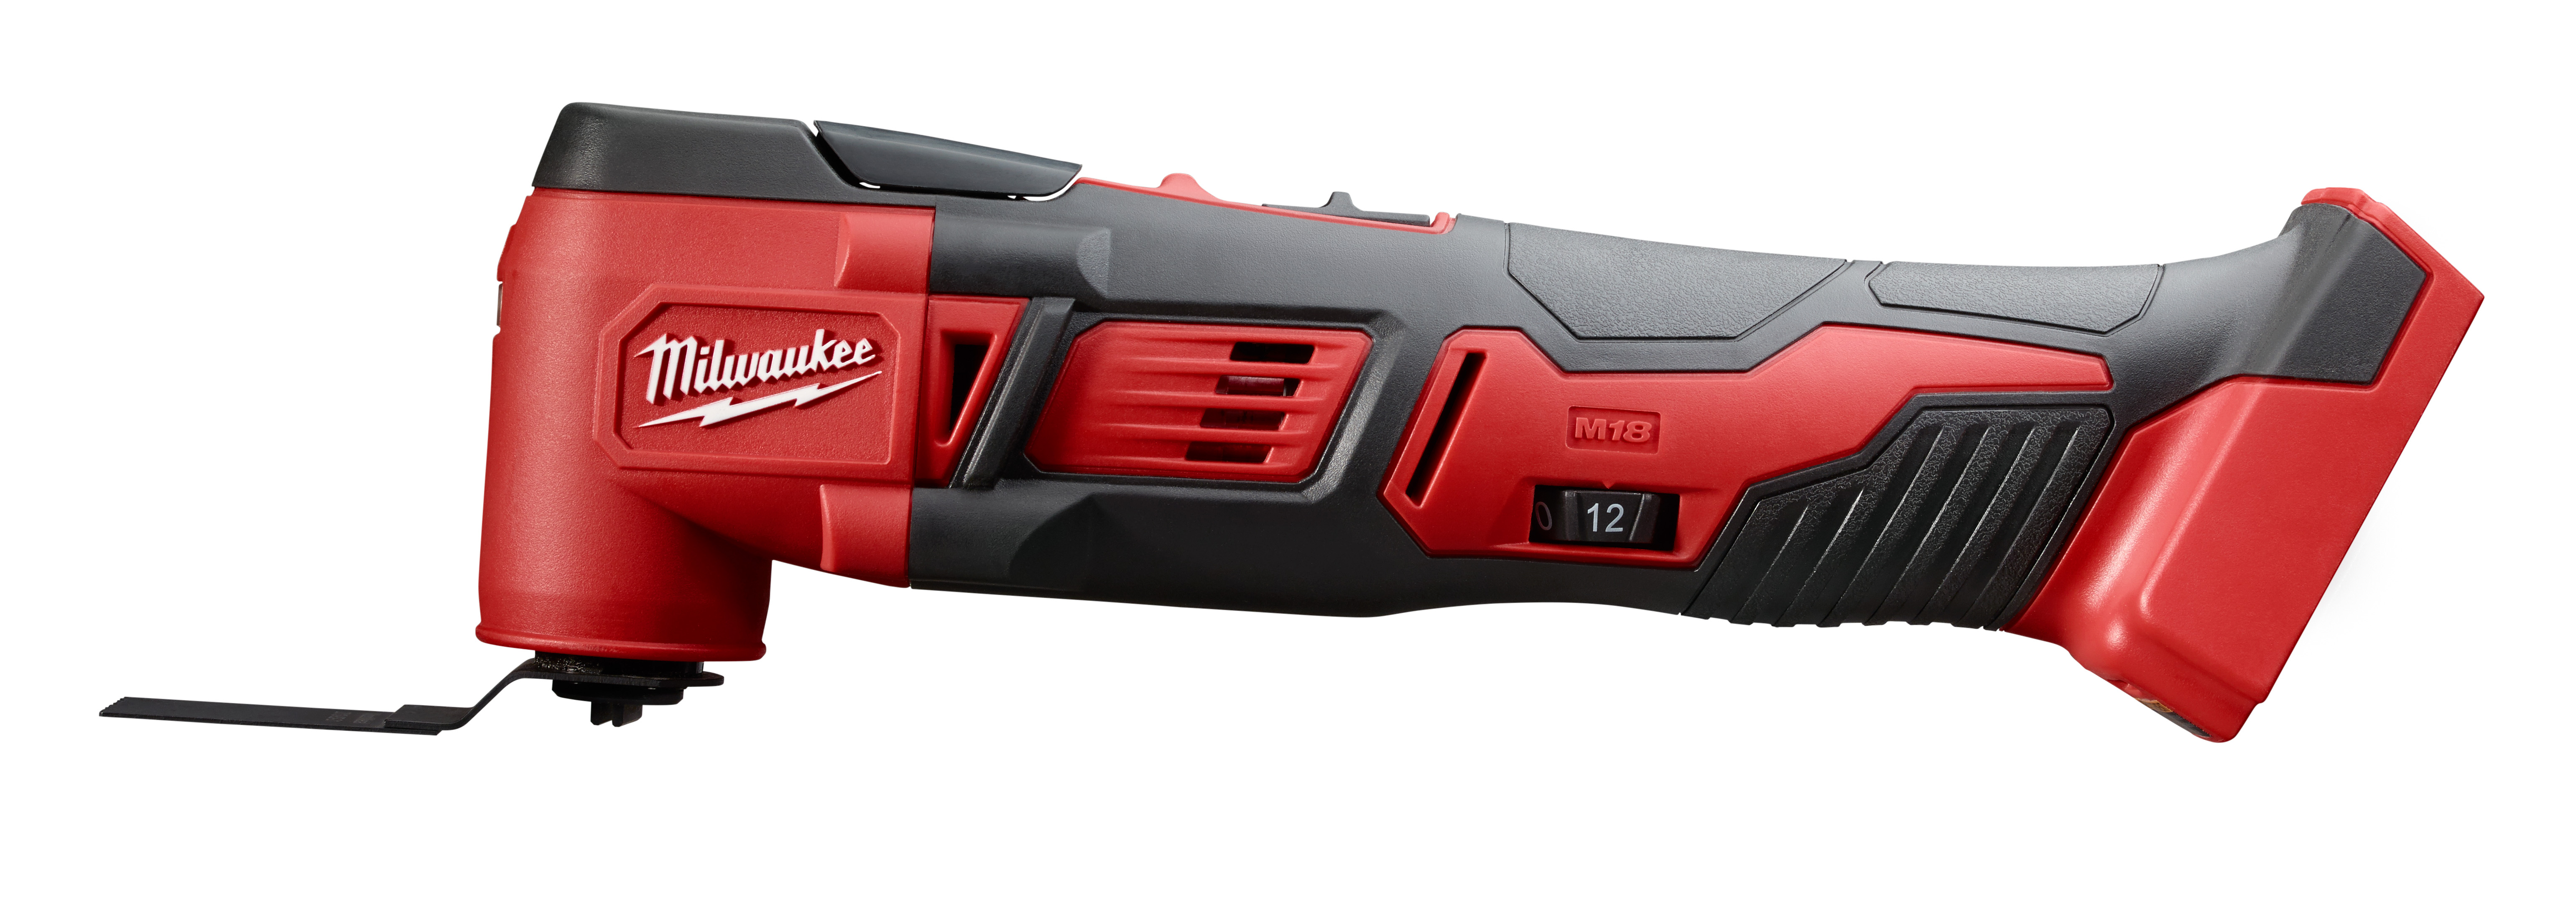 M18 18 Volt Lithium-Ion Cordless Multi-Tool - Tool Only